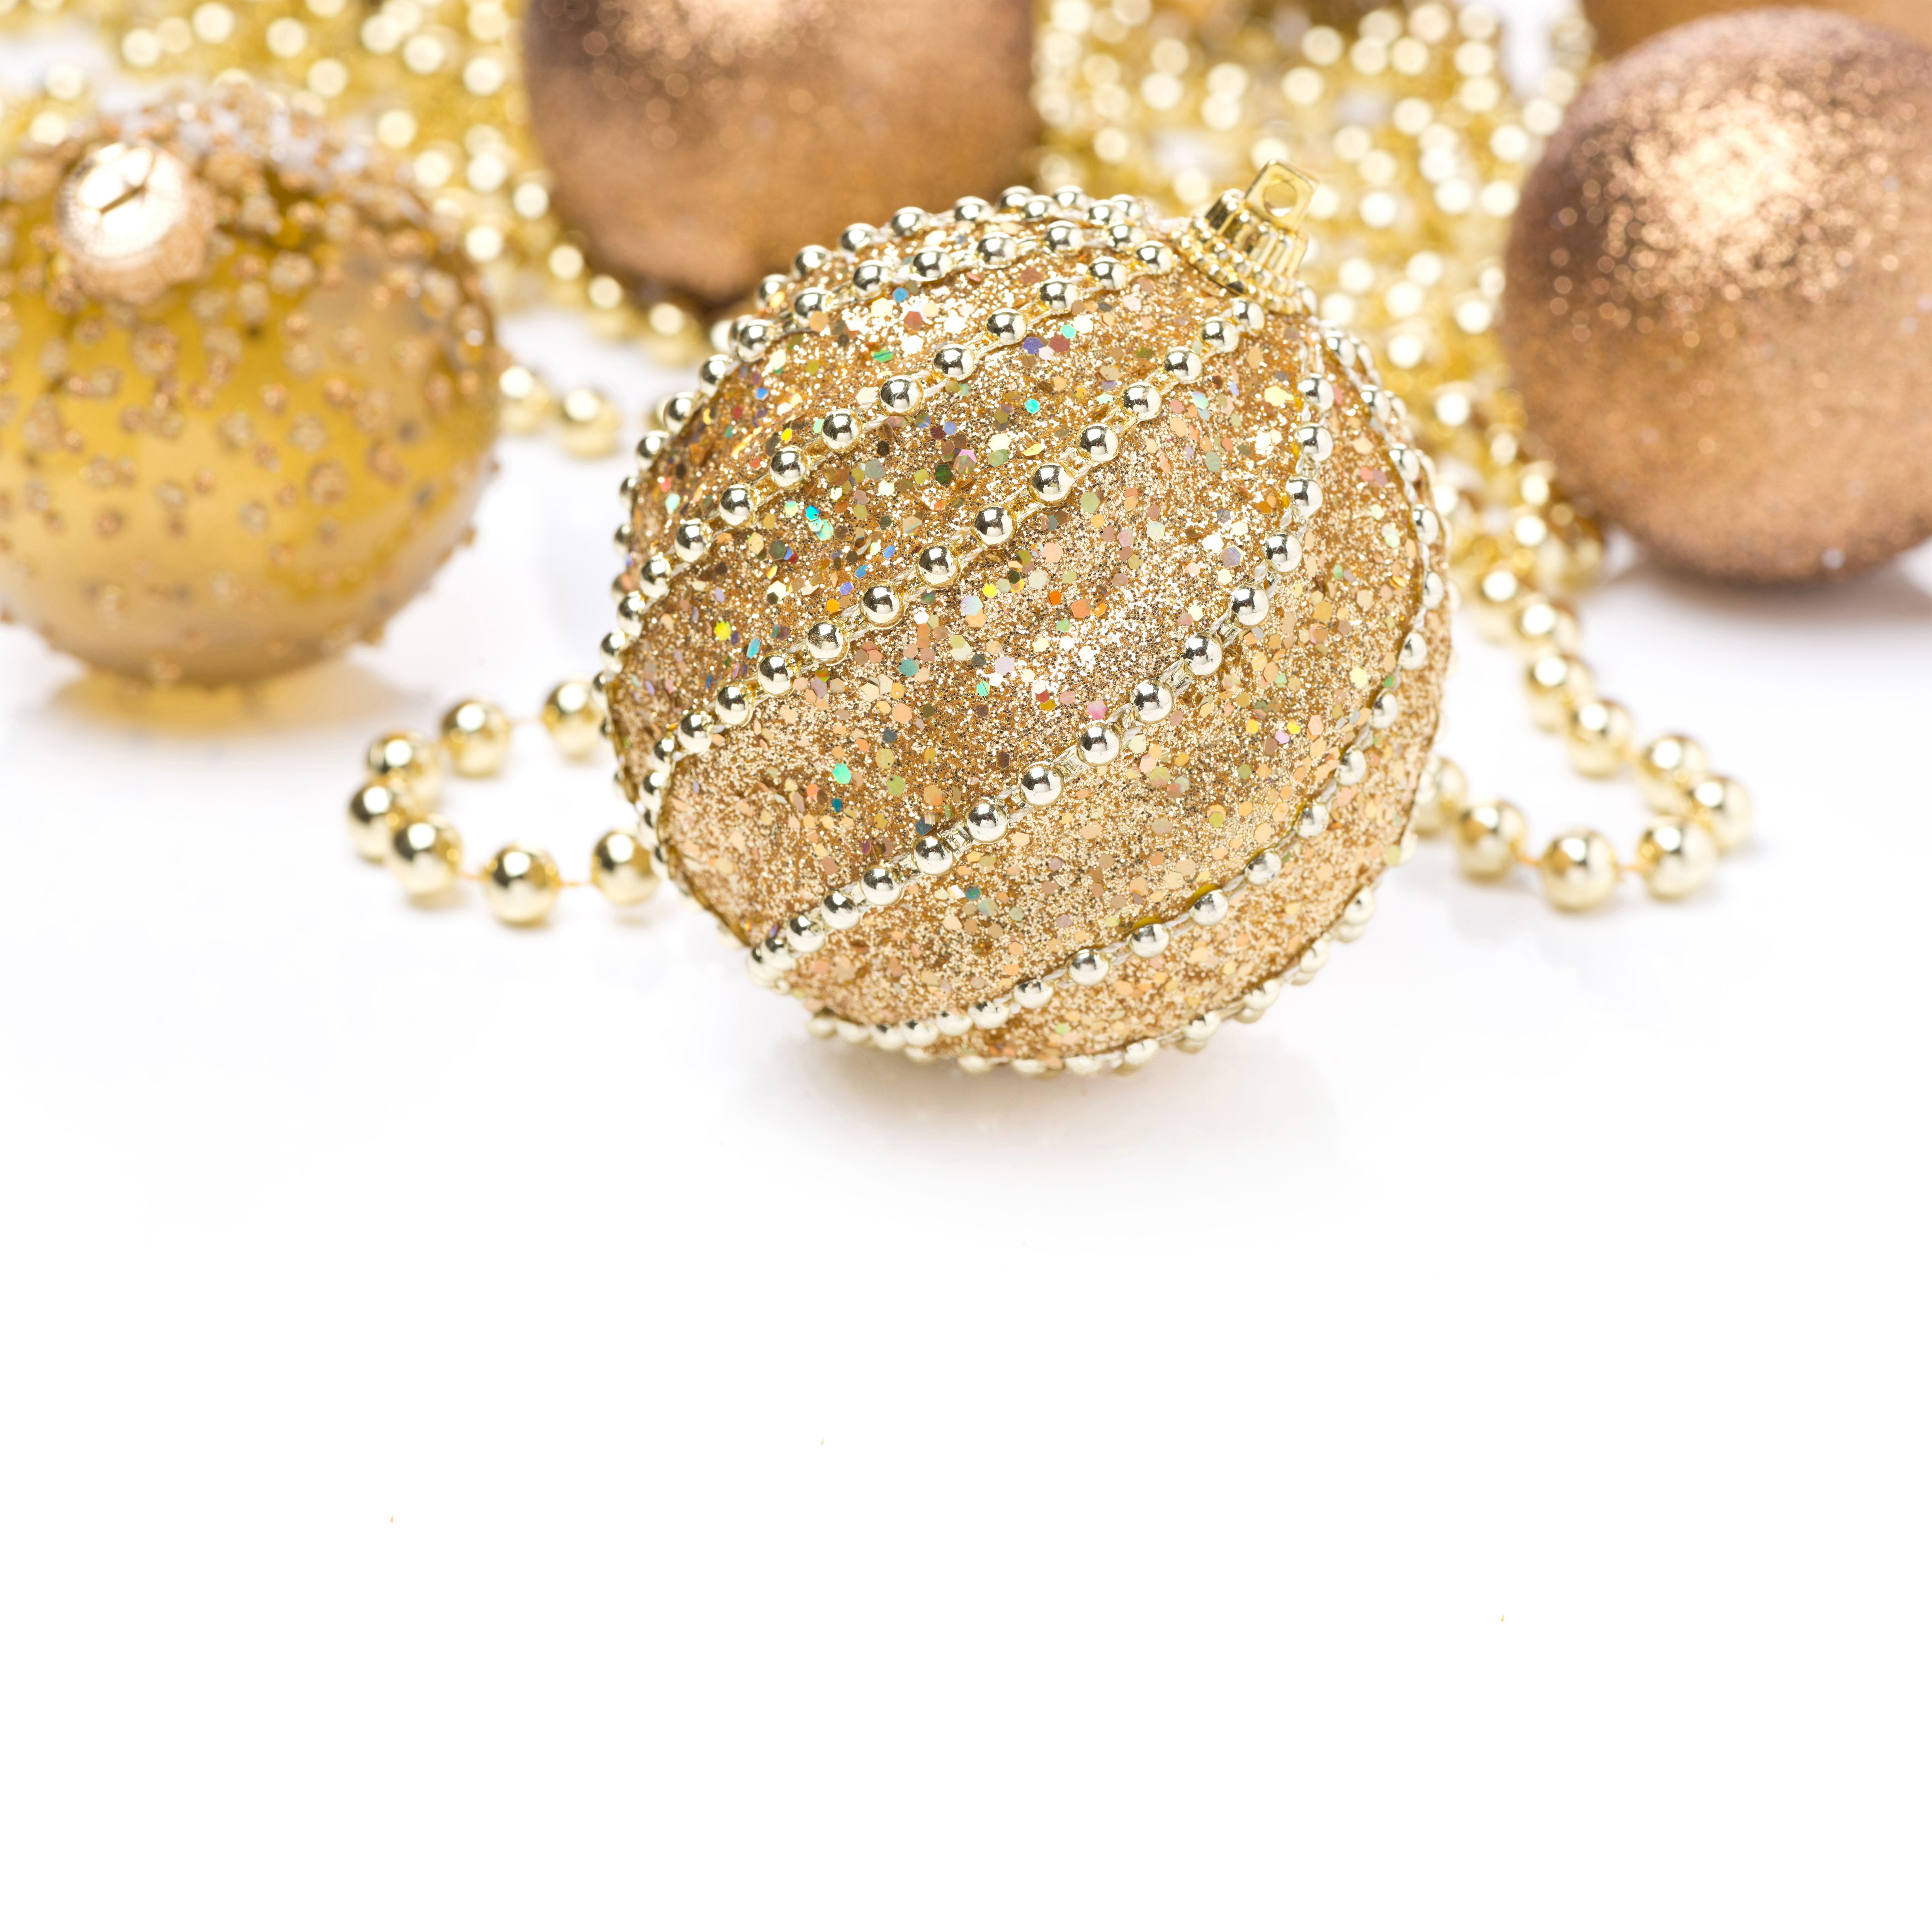 Christmas White Background With Gold Christmas Balls Quality Image And Transparent PNG Free Clipart